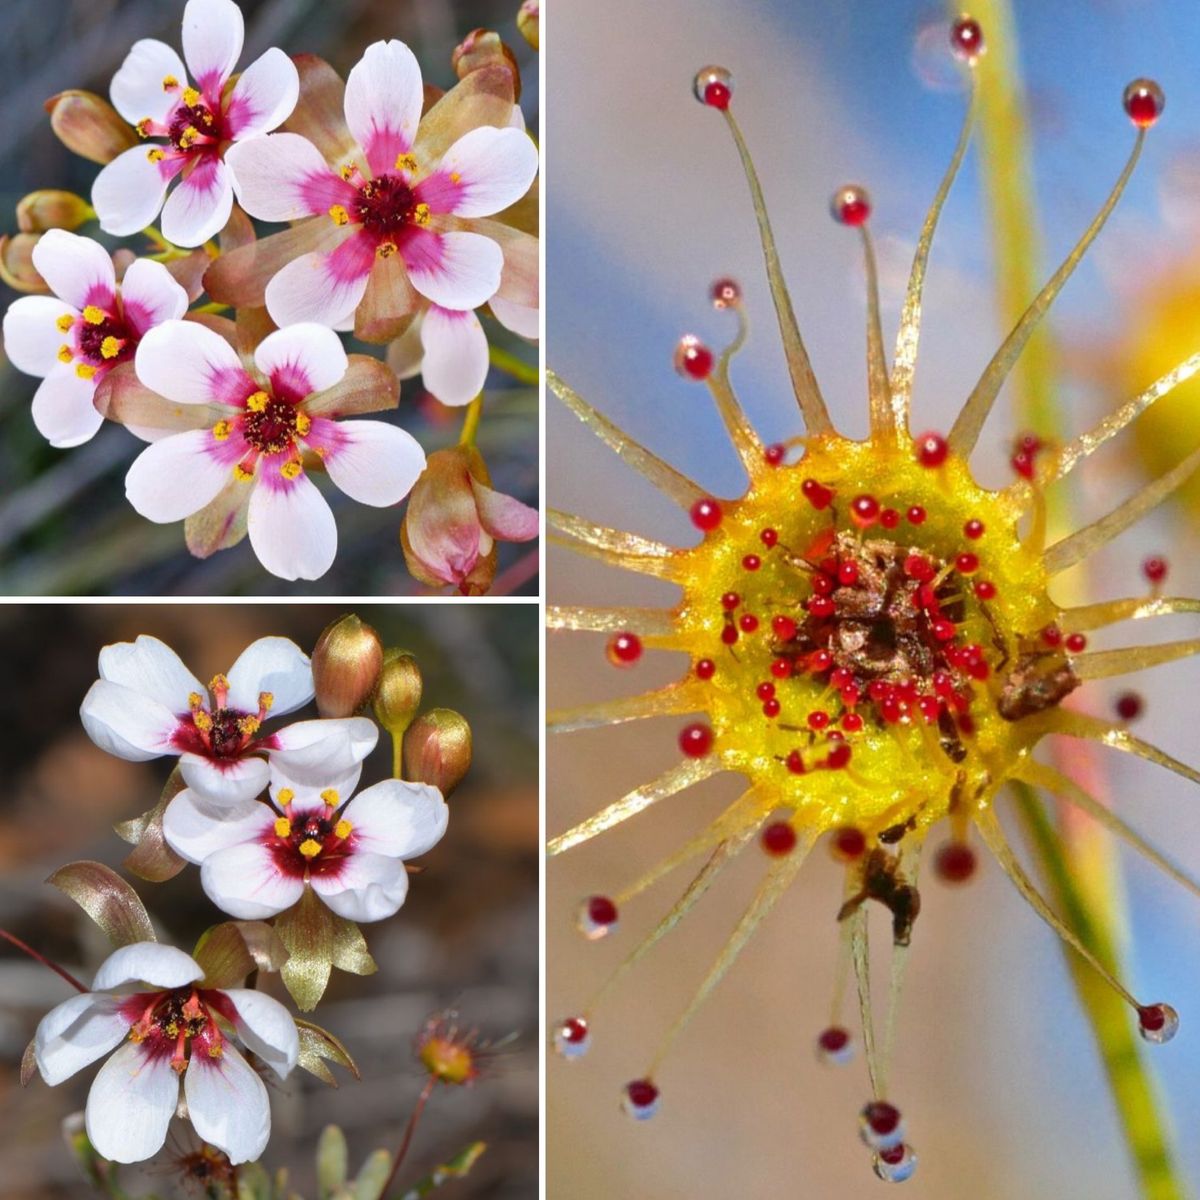 Citizen scientists, social media & the Drosera microphylla complex - Thilo Kruger